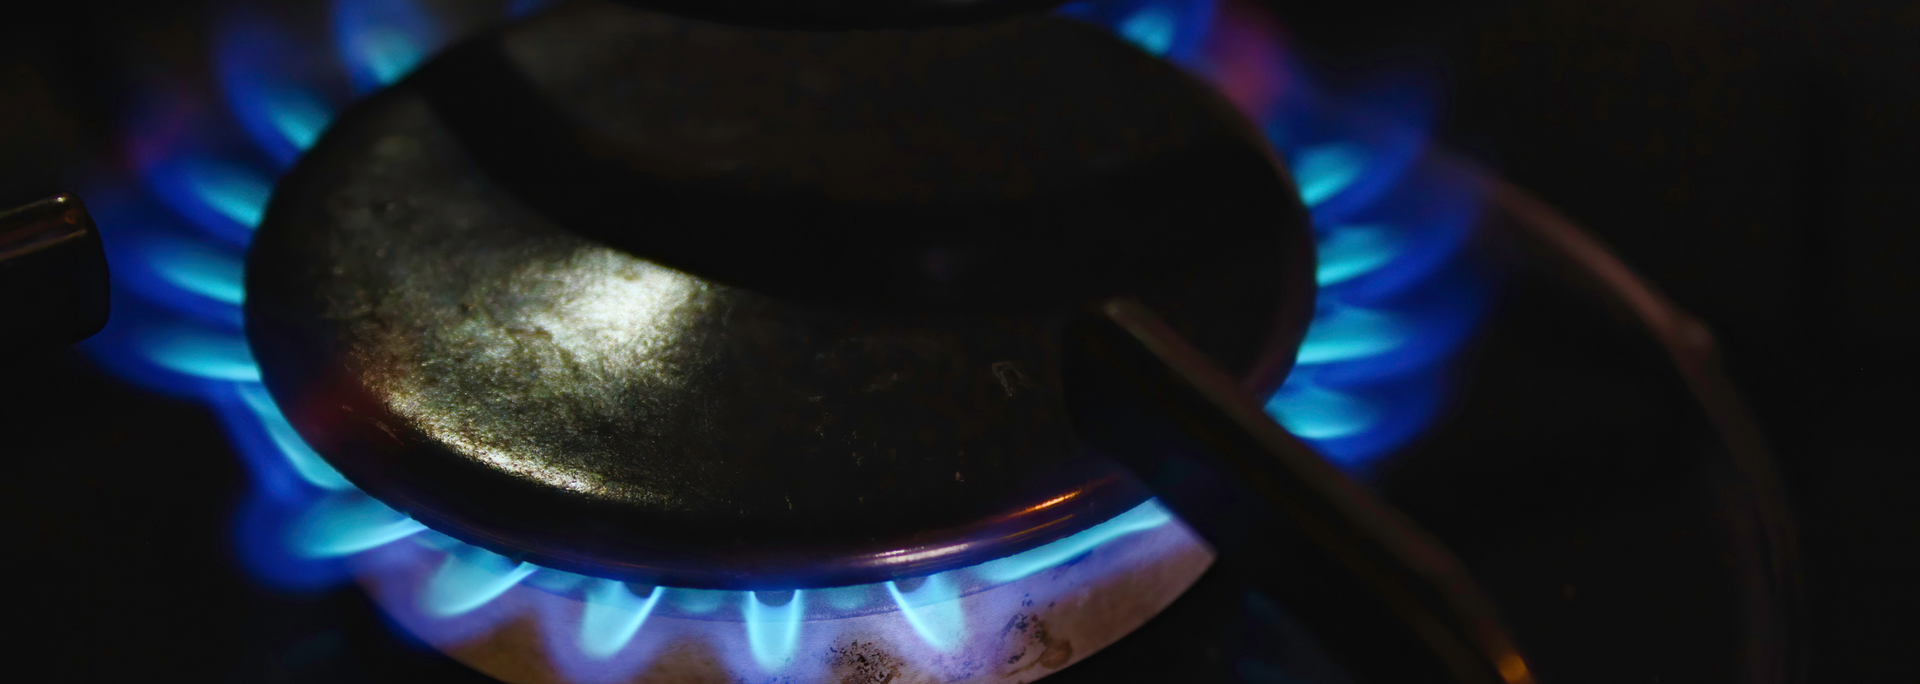 Picture of a a lit gas hob